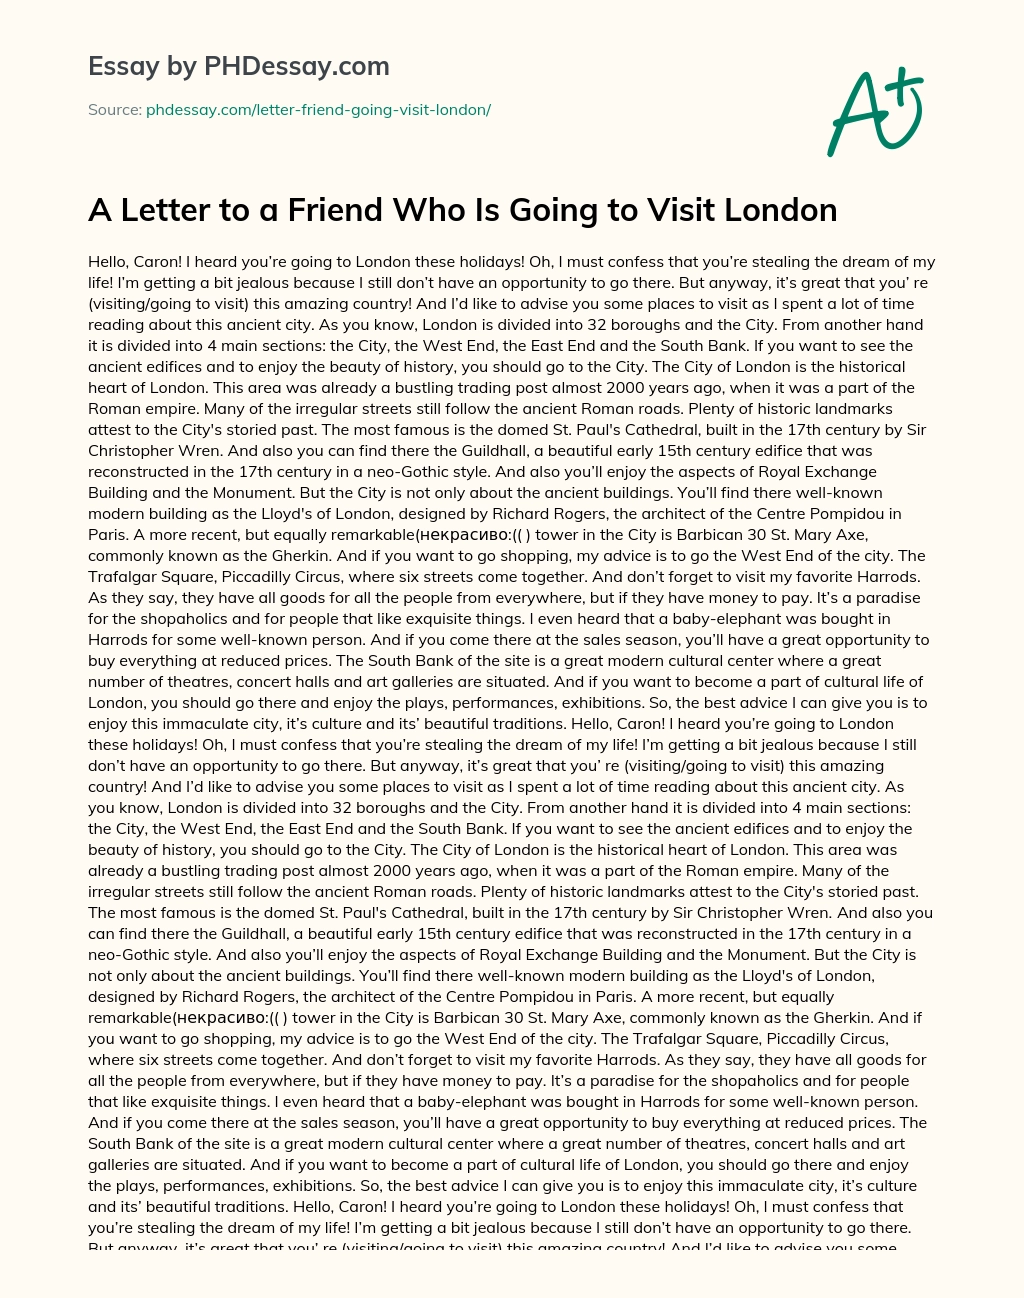 A Letter to a Friend Who Is Going to Visit London essay